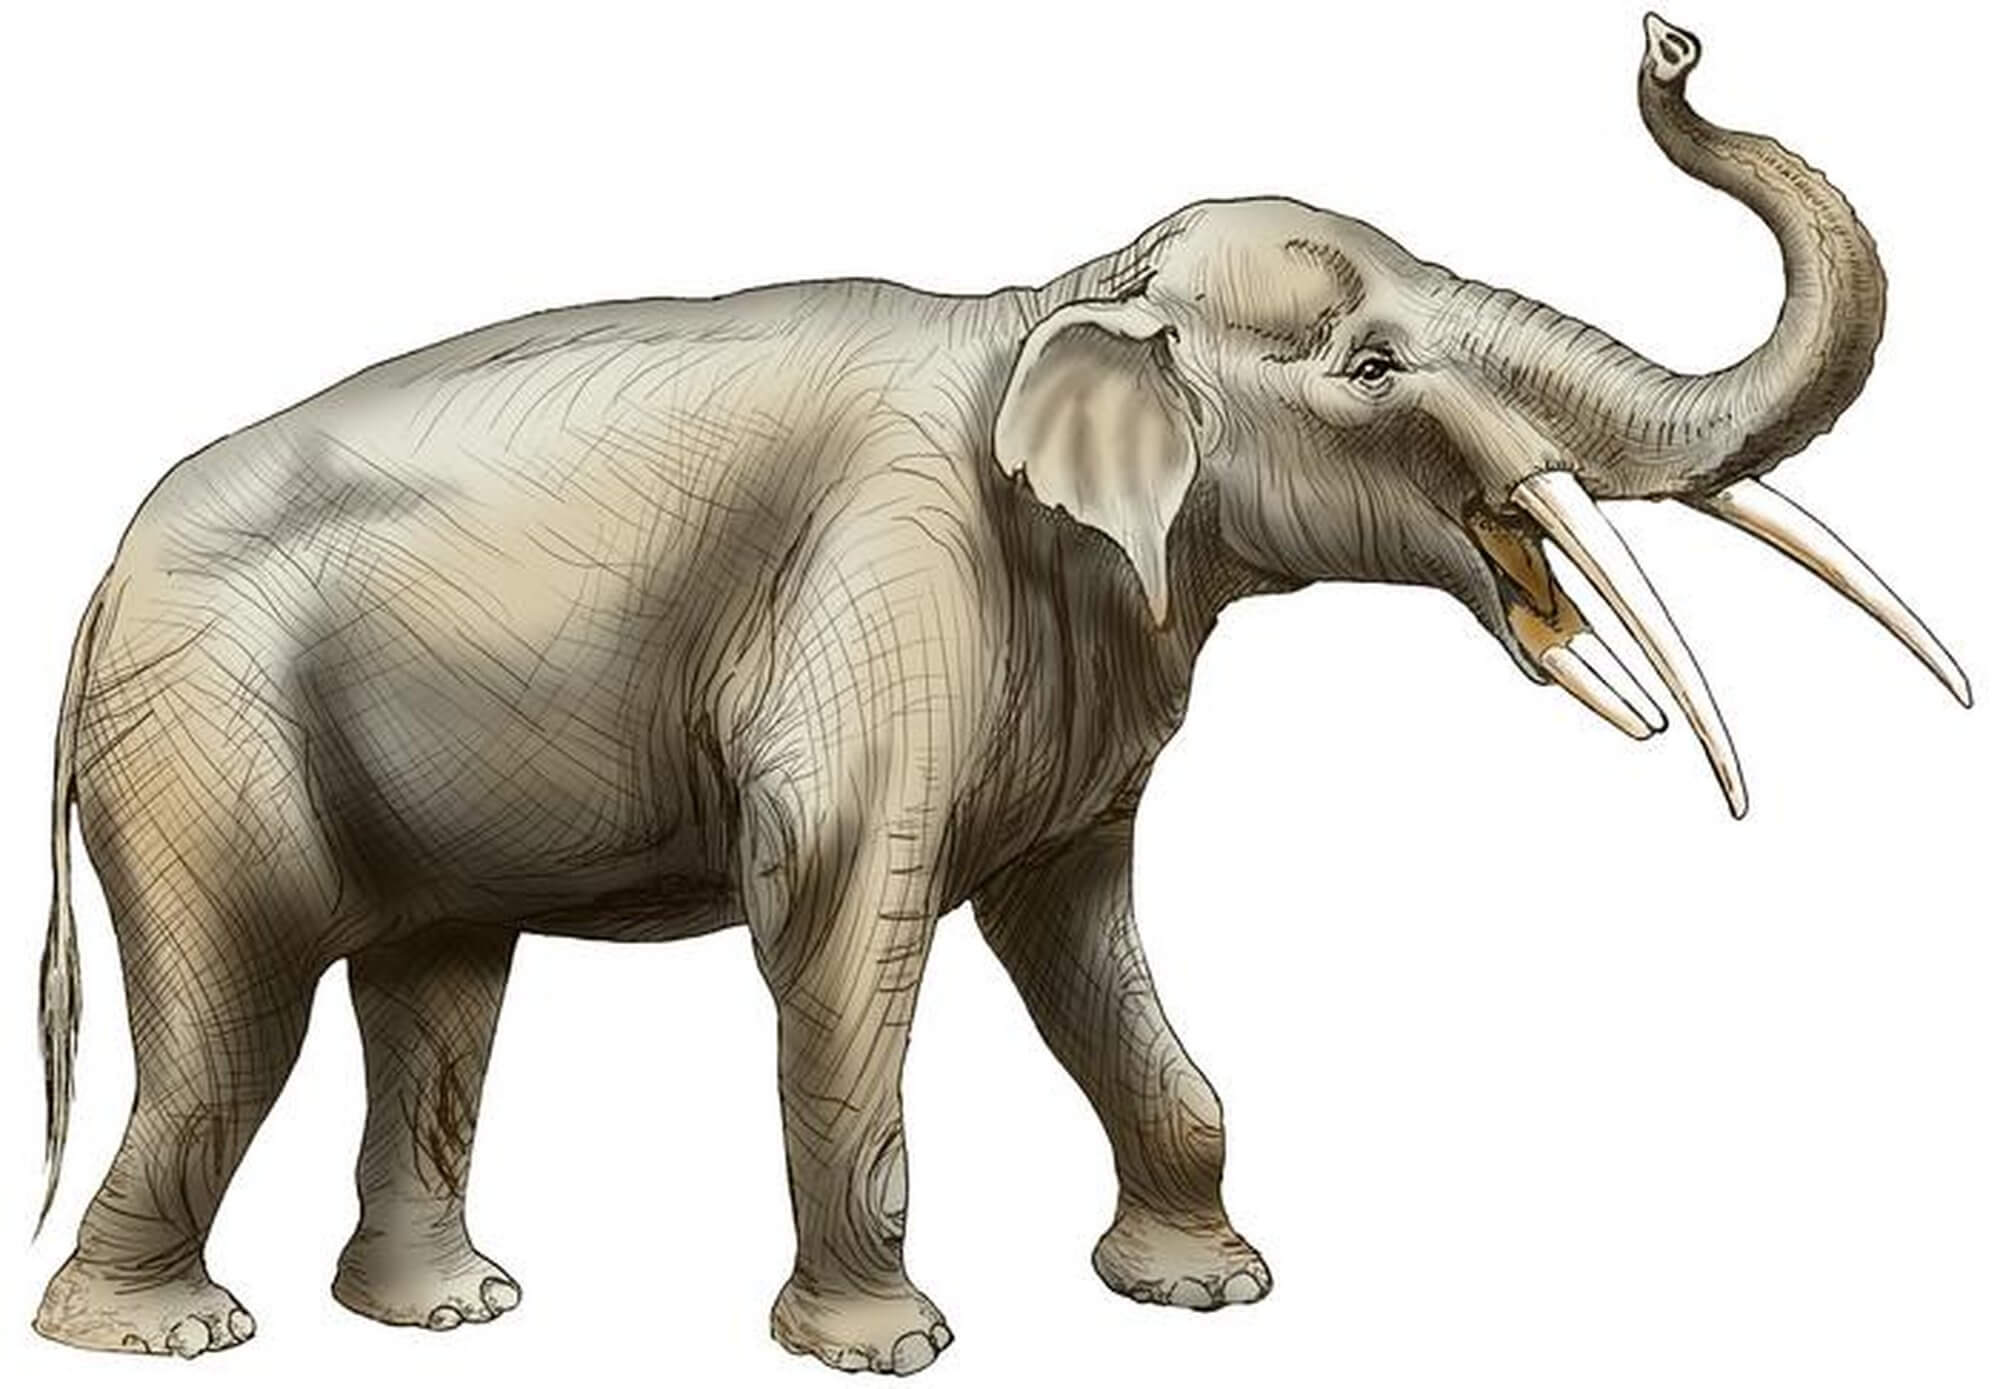 Researchers and volunteers with the Florida Museum of Natural History have discovered the ancient remains of several gomphotheres at a fossil site in North Florida.